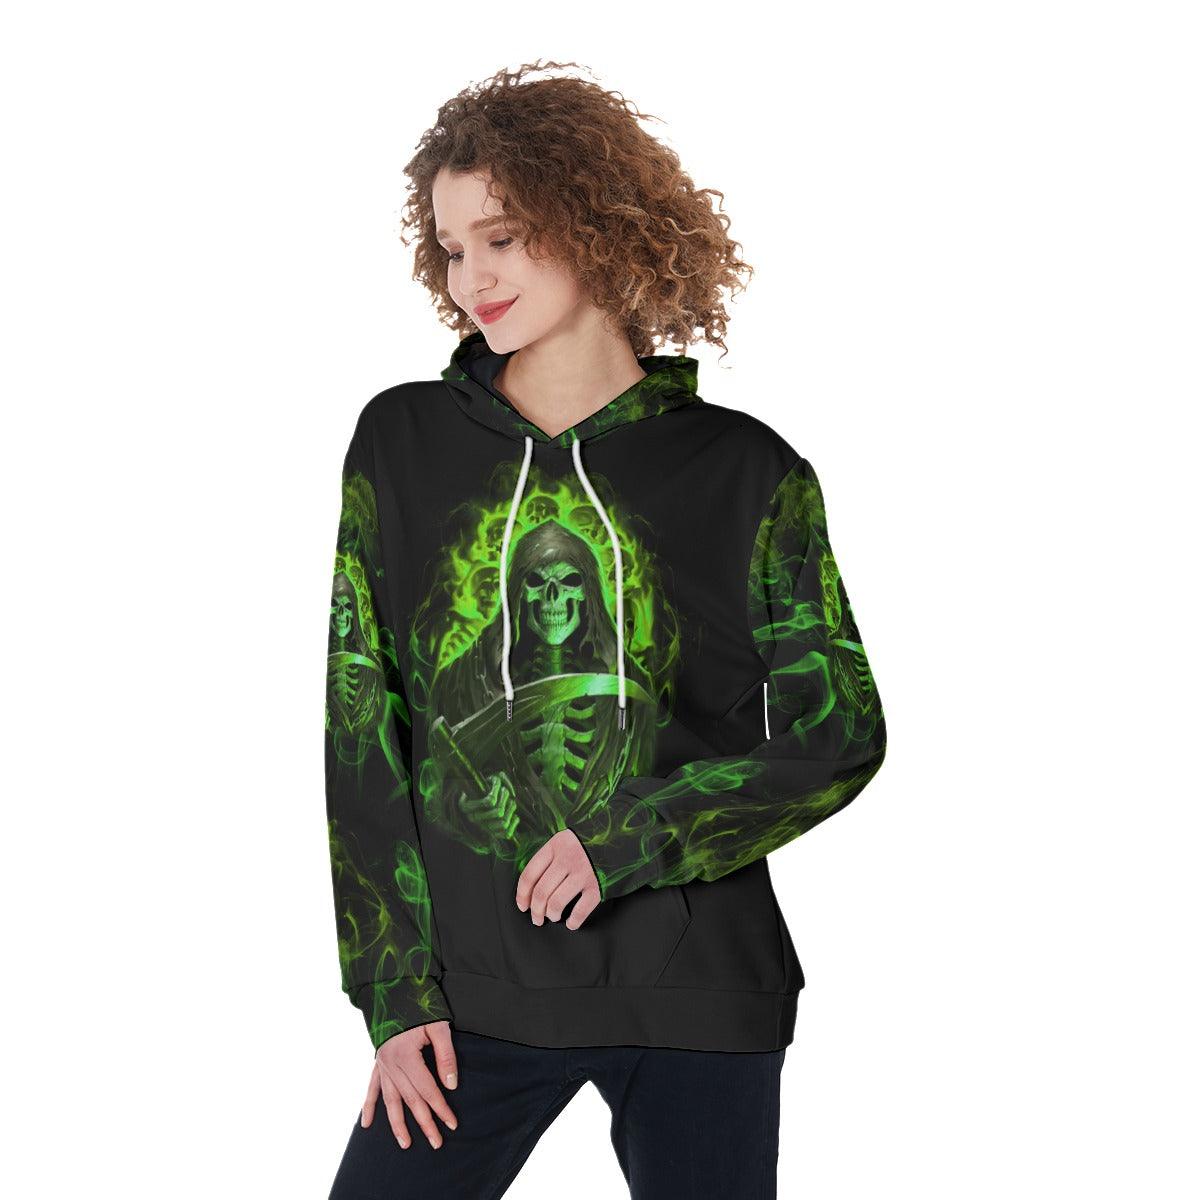 Green Skull Fire When Someone Calls Me An Asshole Funny Hoodie For Women - Wonder Skull